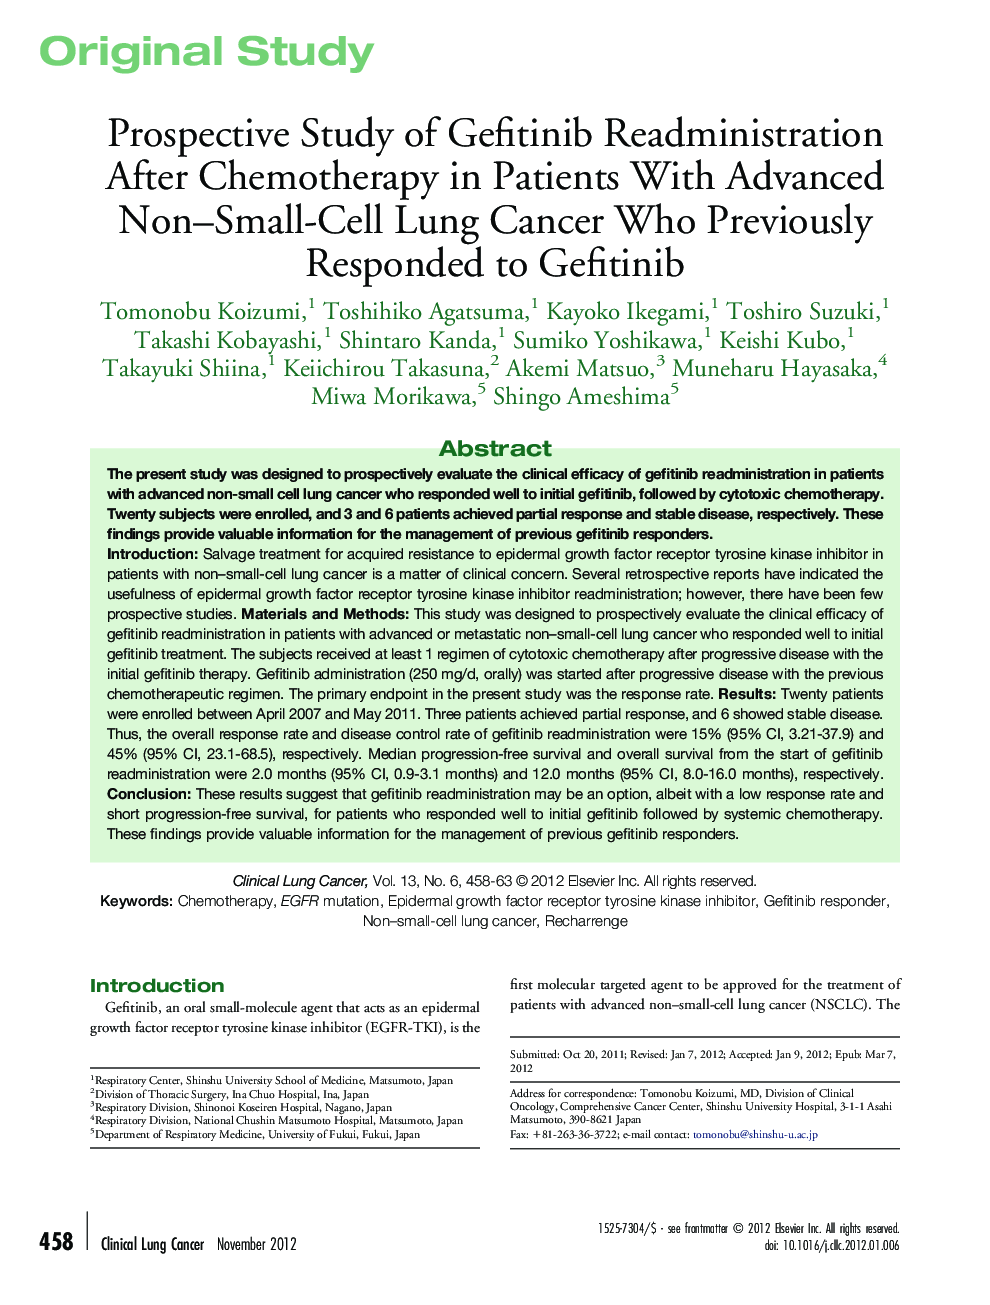 Prospective Study of Gefitinib Readministration After Chemotherapy in Patients With Advanced Non–Small-Cell Lung Cancer Who Previously Responded to Gefitinib